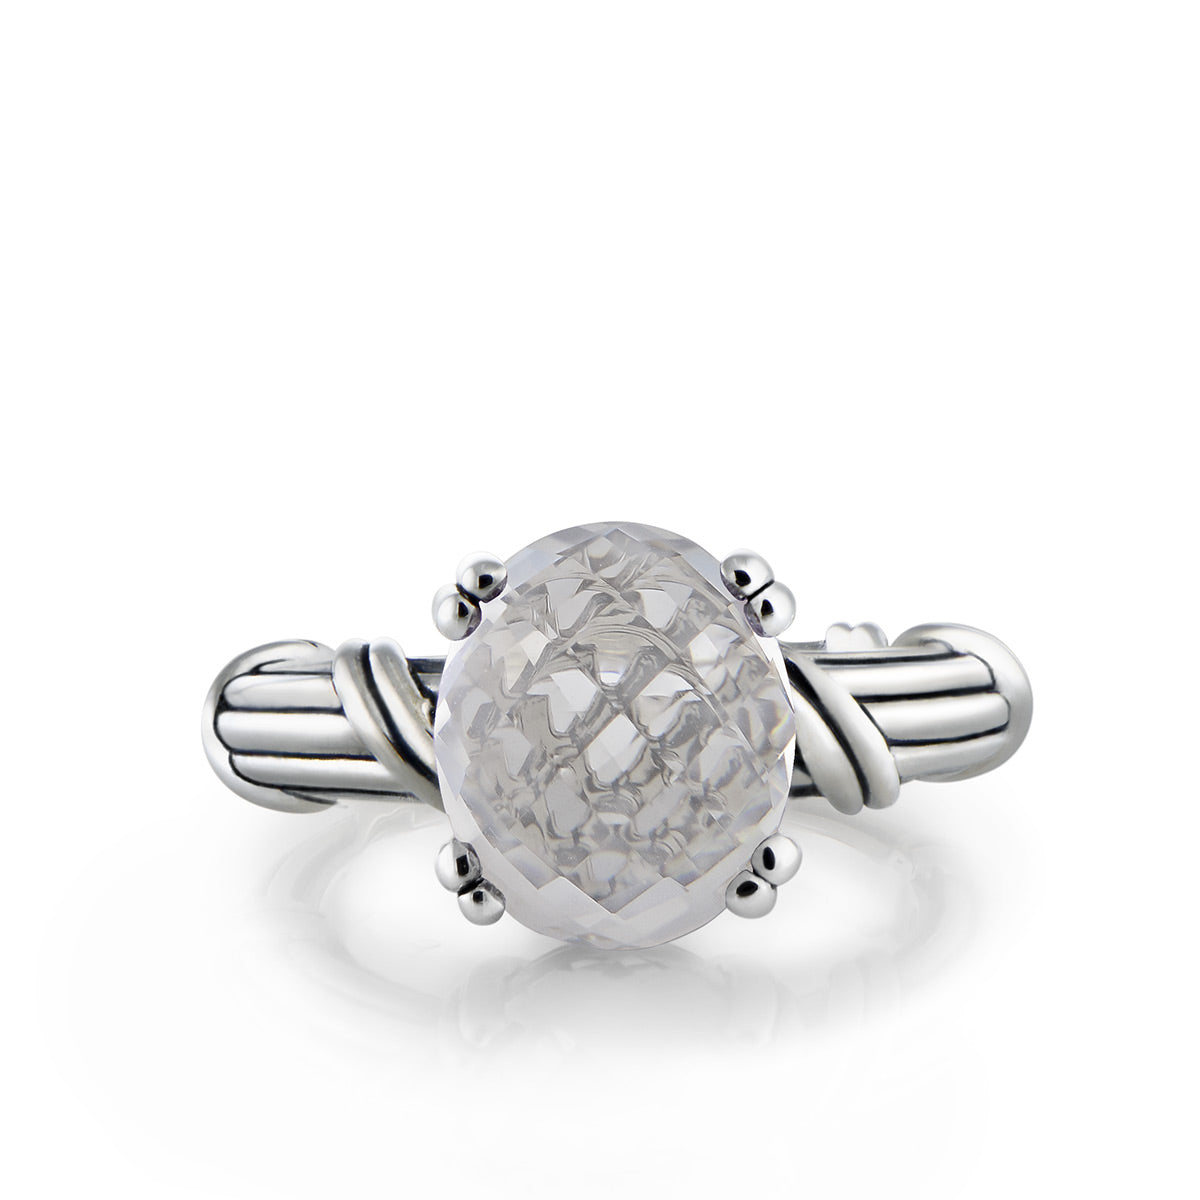 Fantasies Rock Crystal Oval Cocktail Ring in sterling silver